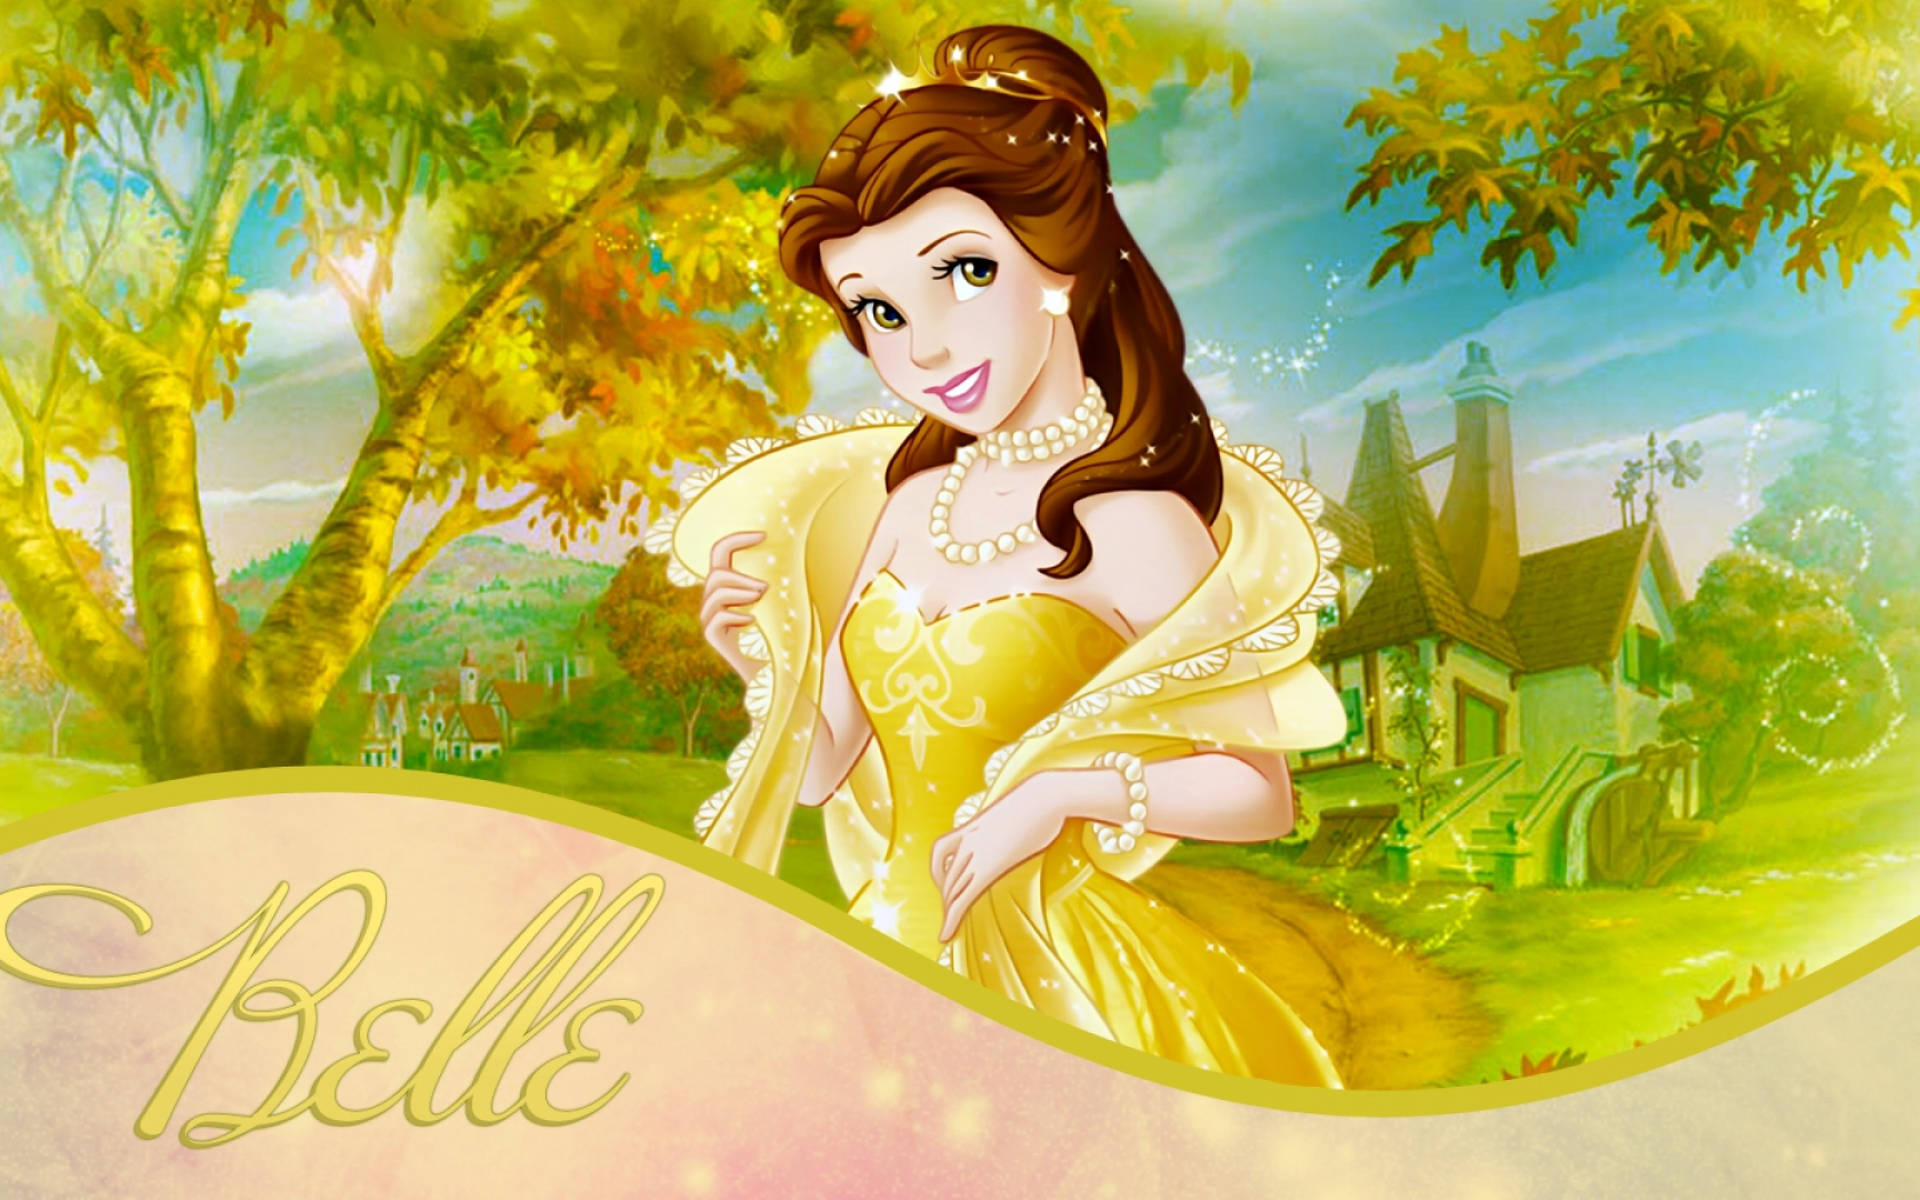 Belle With Yellow Dress